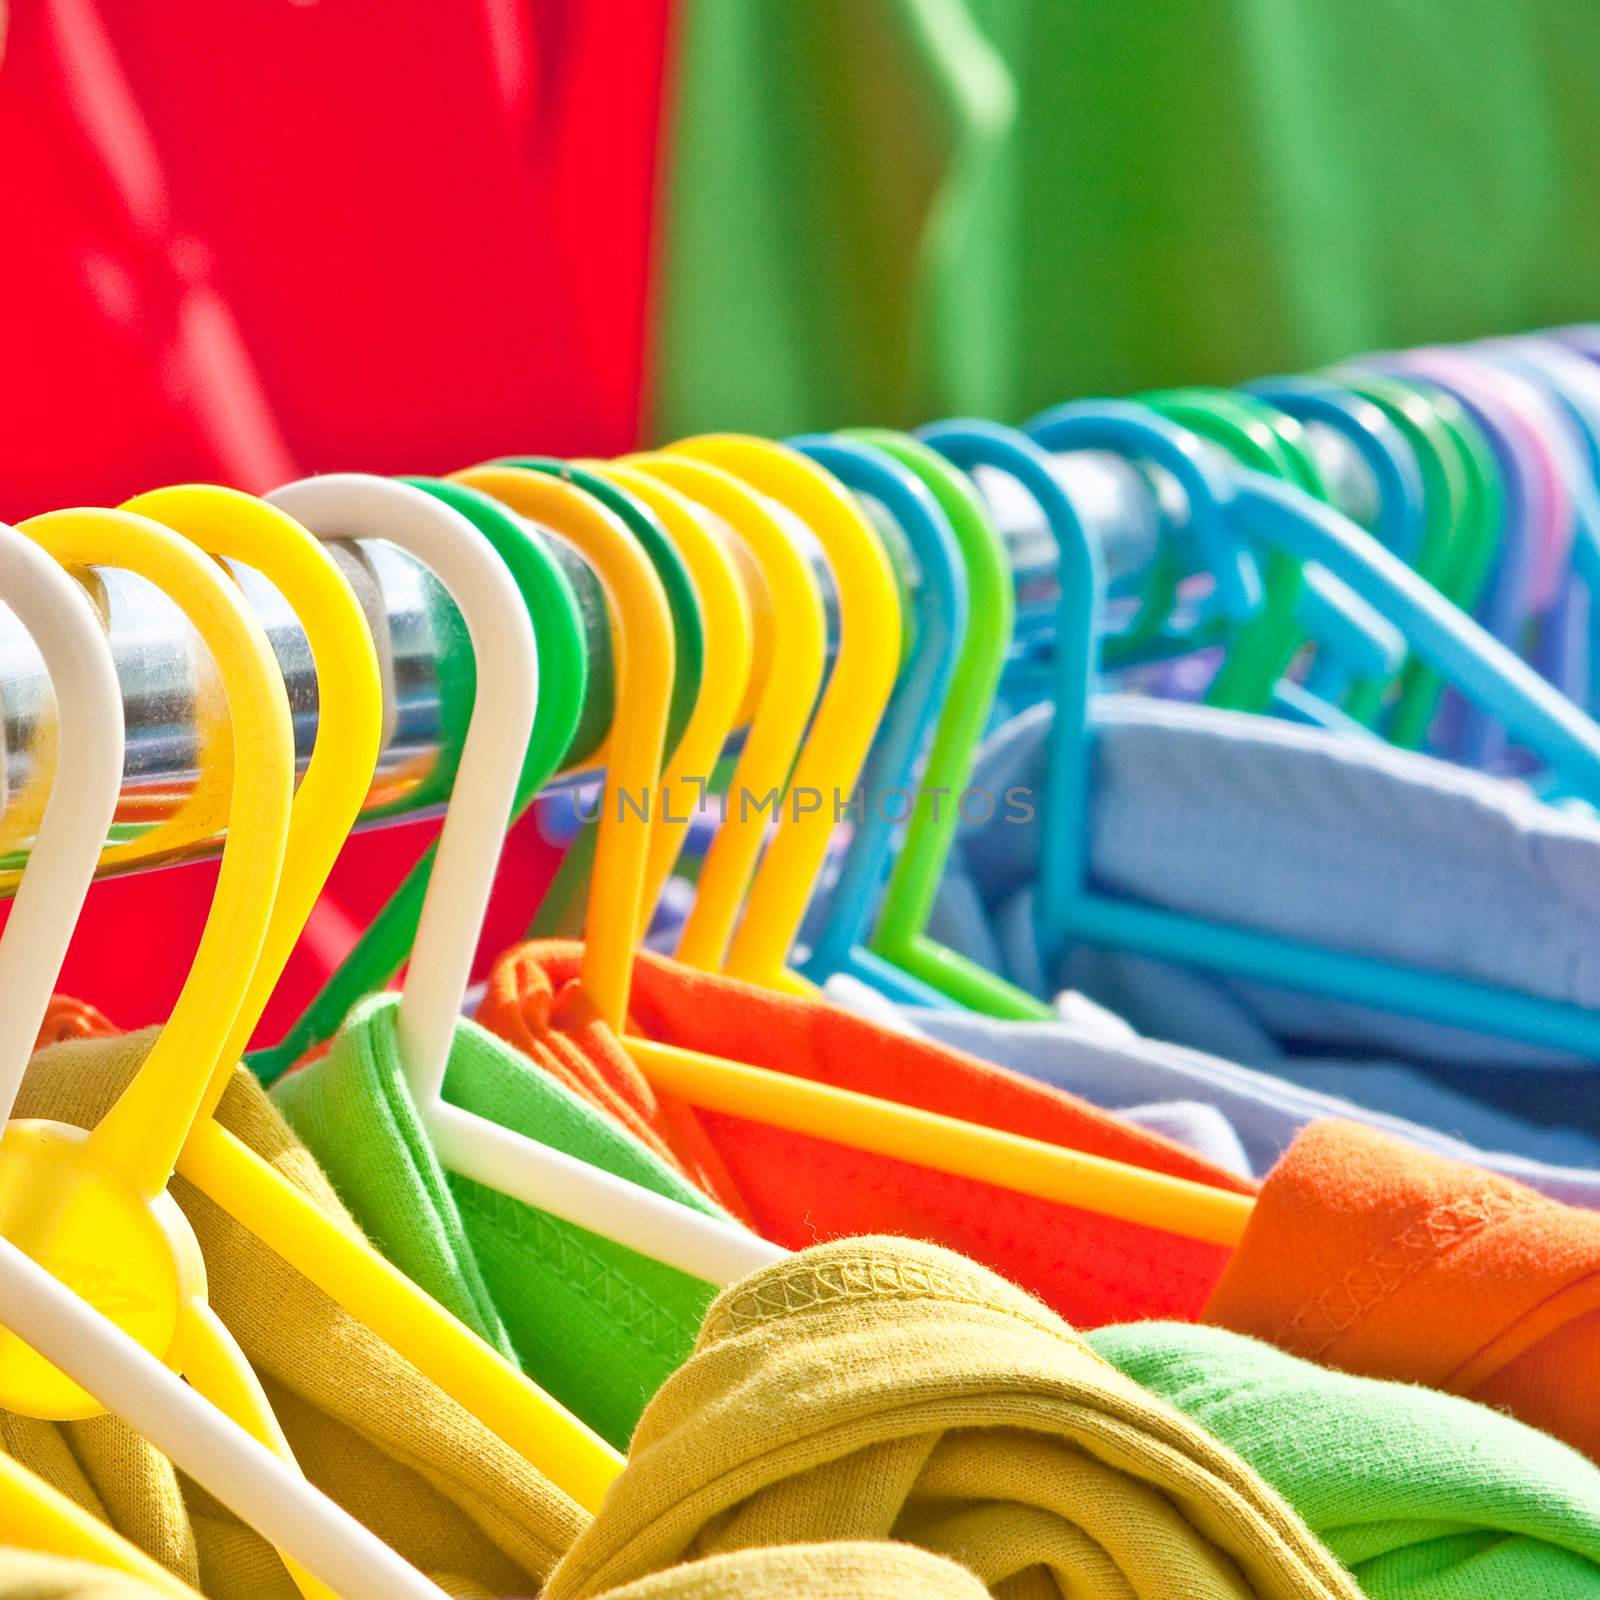 A row of colorful clothes on plastic hangers